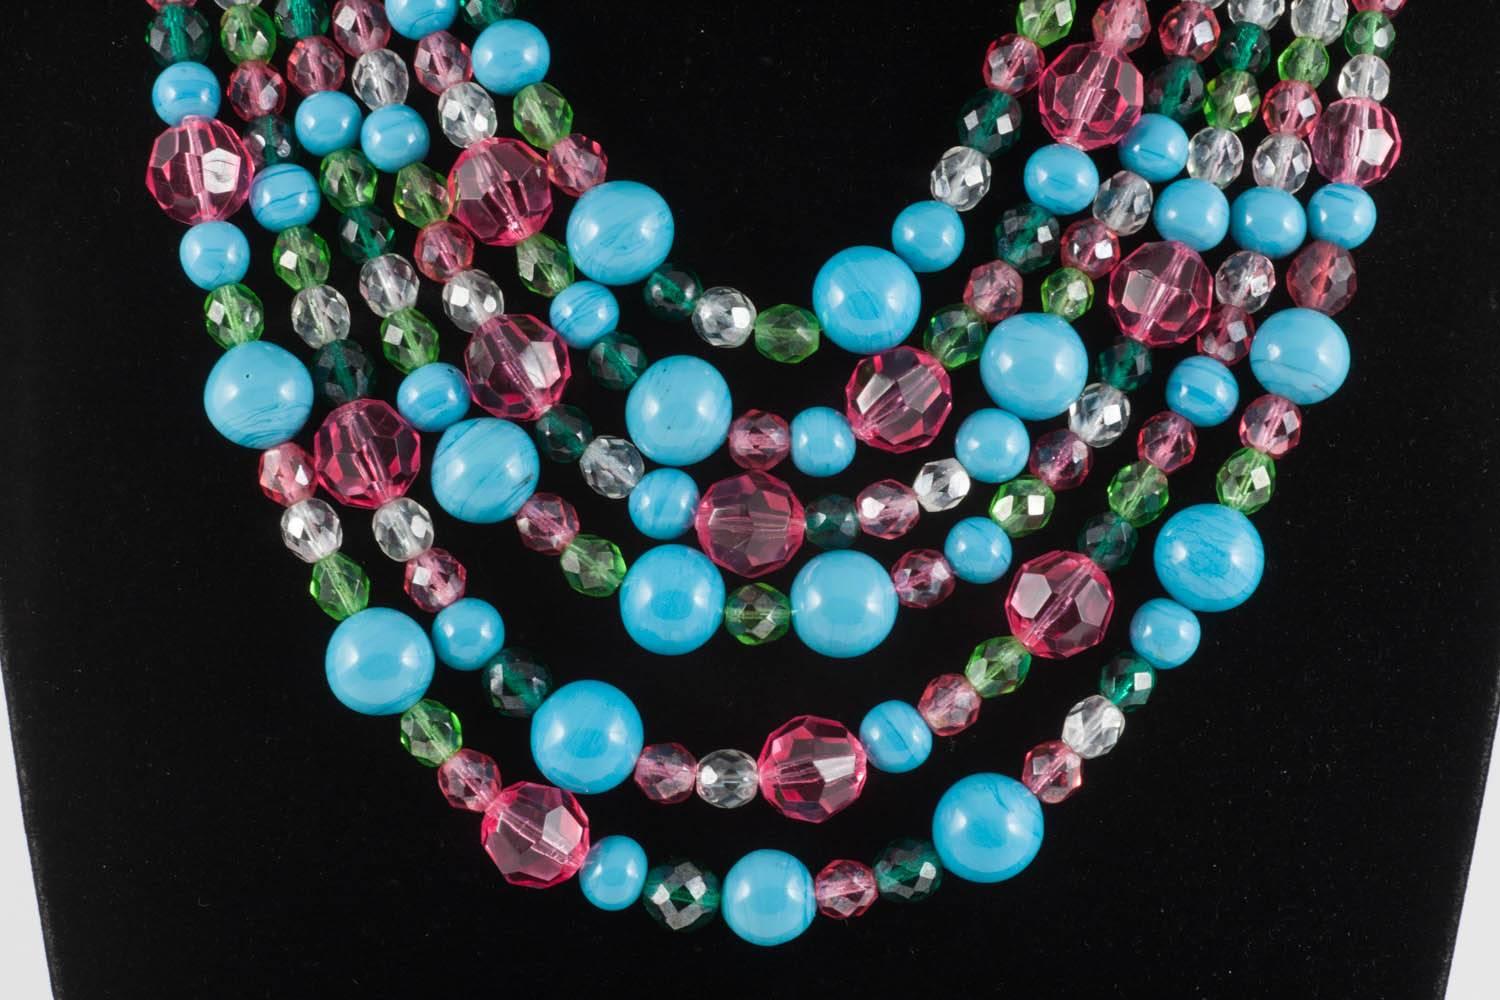 Ravishing colours of turquoise, raspberry, clear and deep peridot are scattered over six graduated rows of this elegant necklace from Coppola e Toppo from the 1950s. 
Of varying cut and size, they are spread through out the necklace, in a non